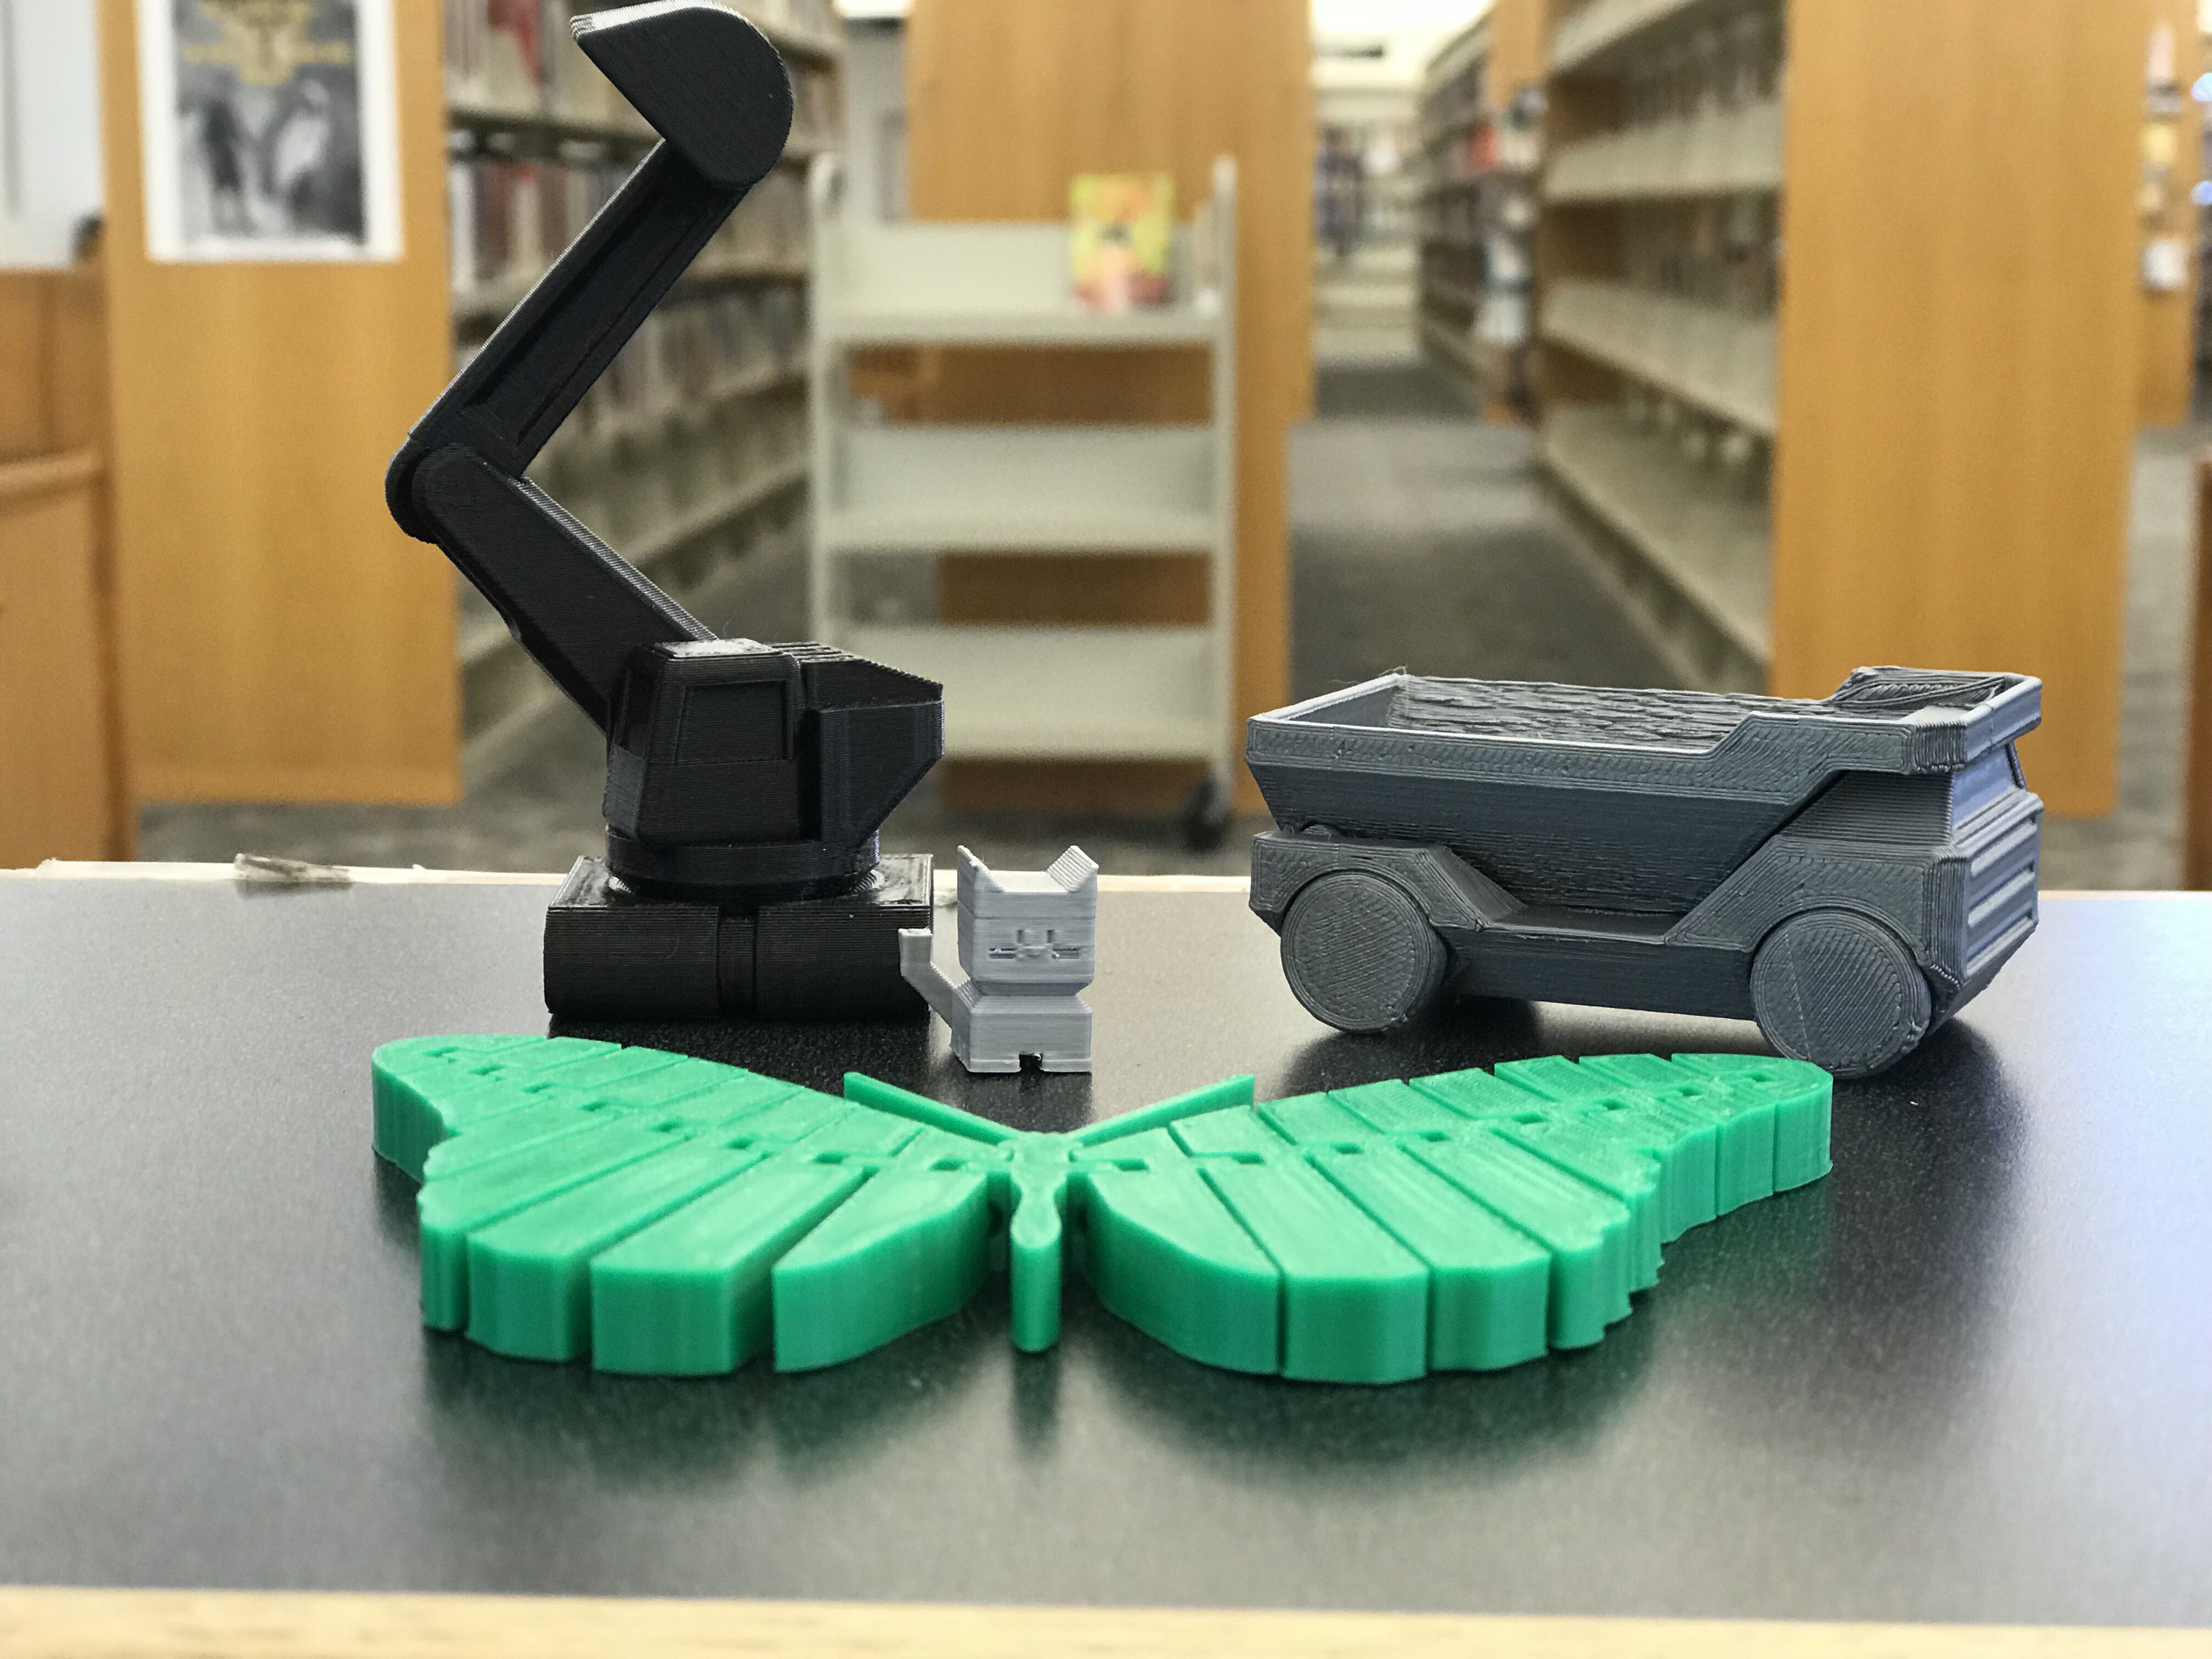 3d printed objects at Sienna Branch Library